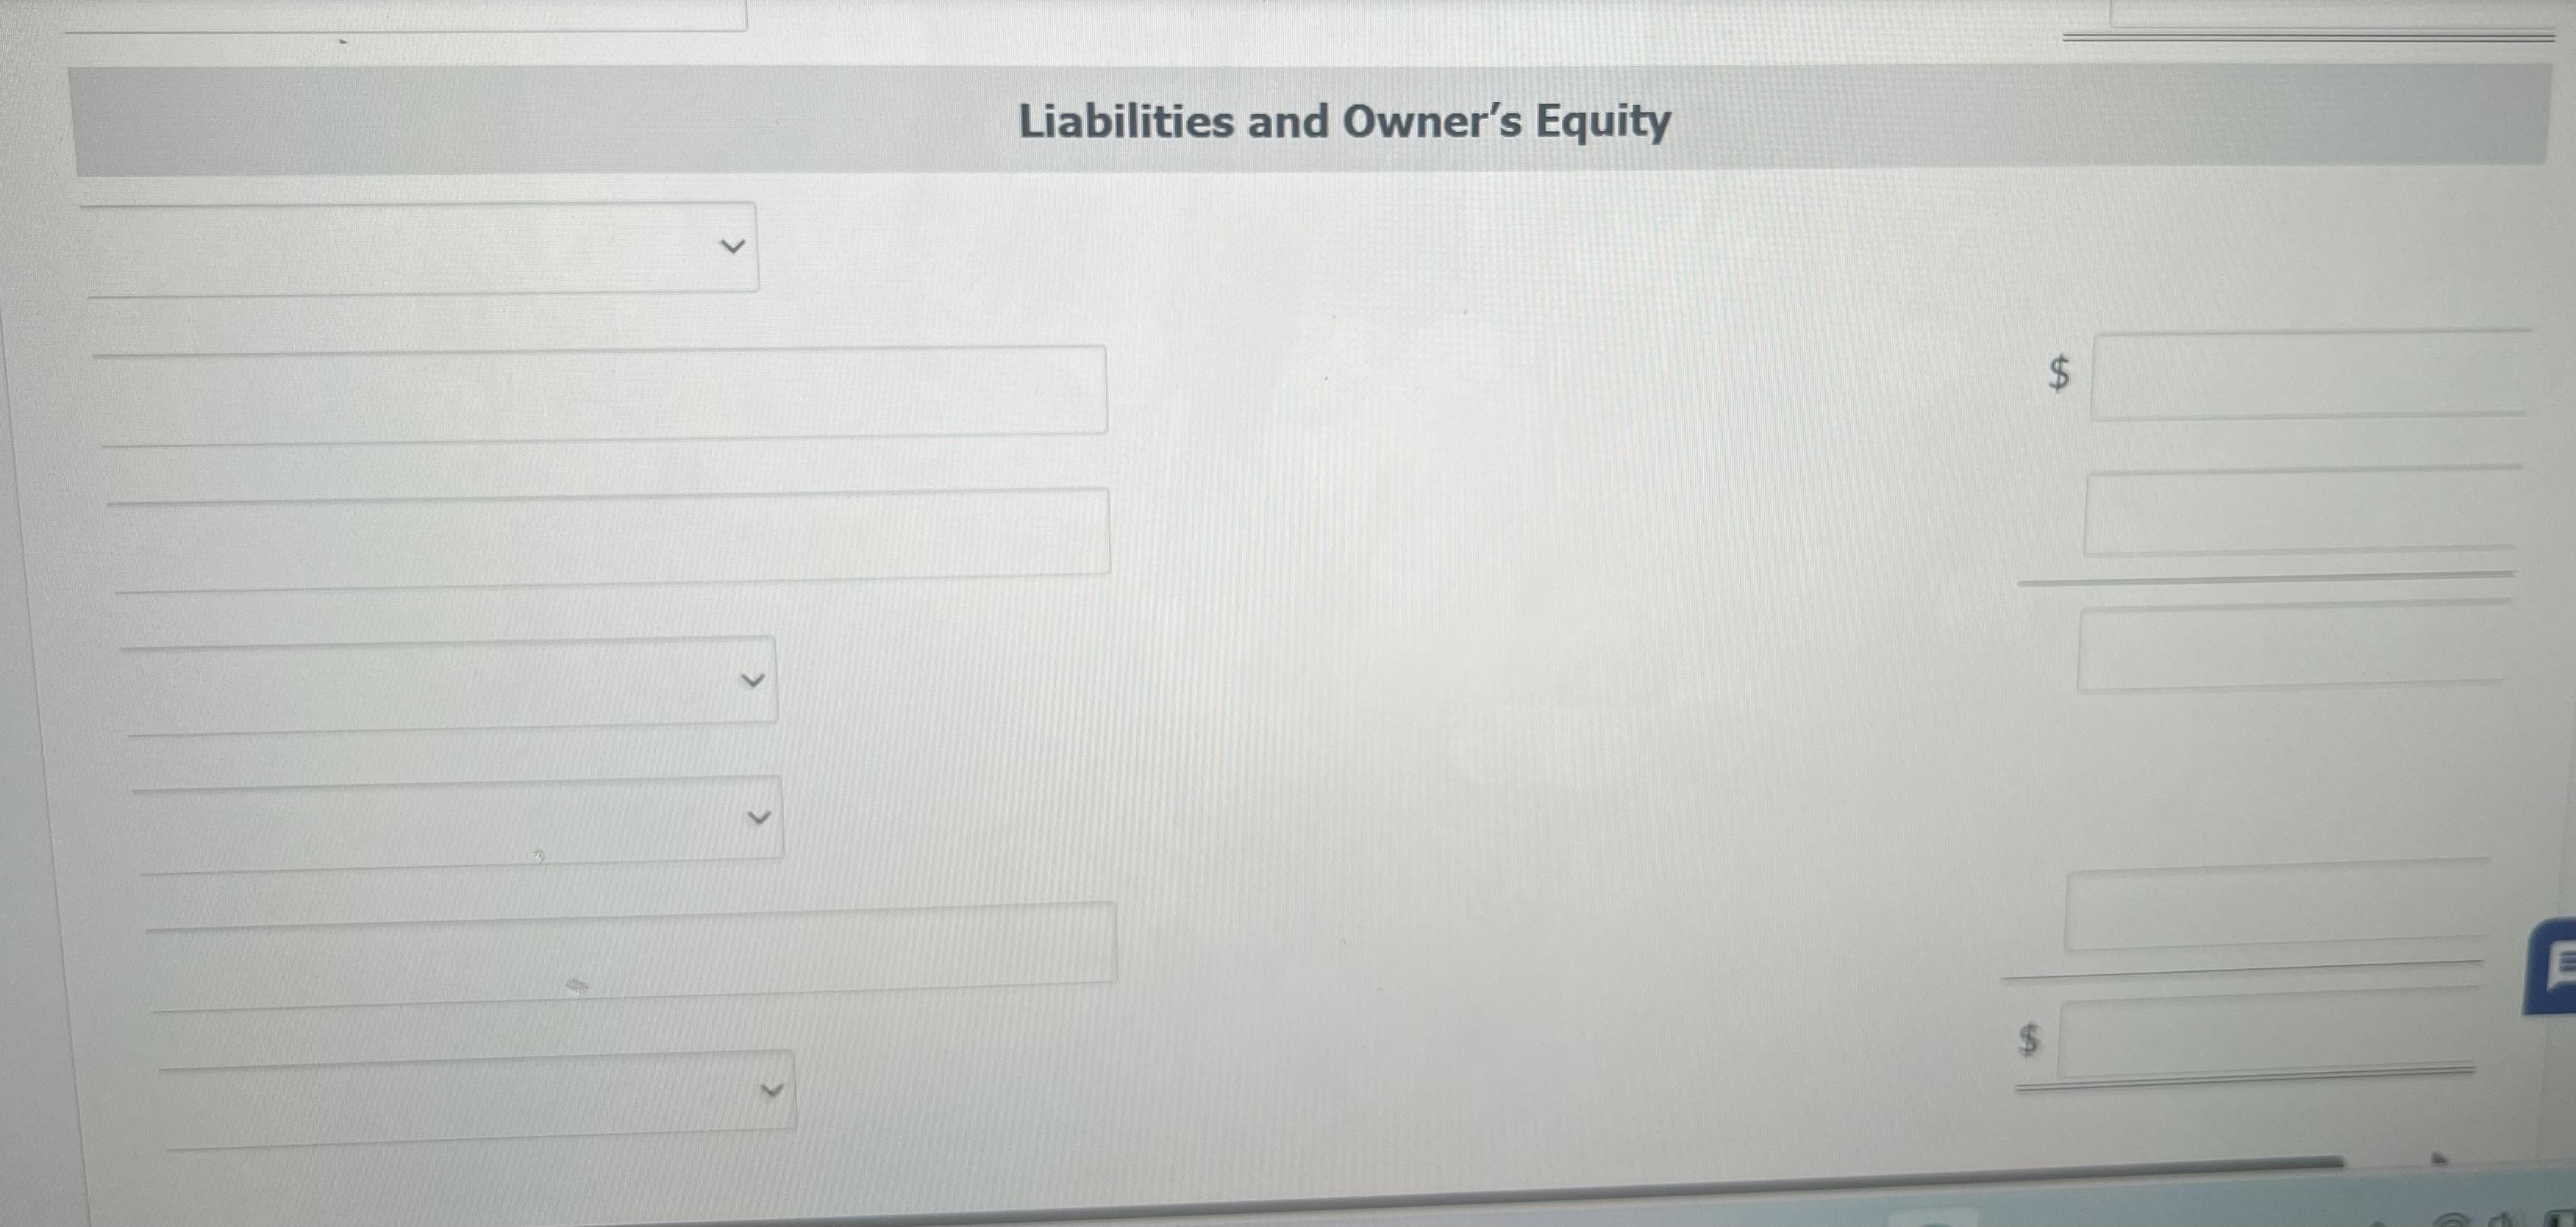 < Liabilities and Owner's Equity LA E